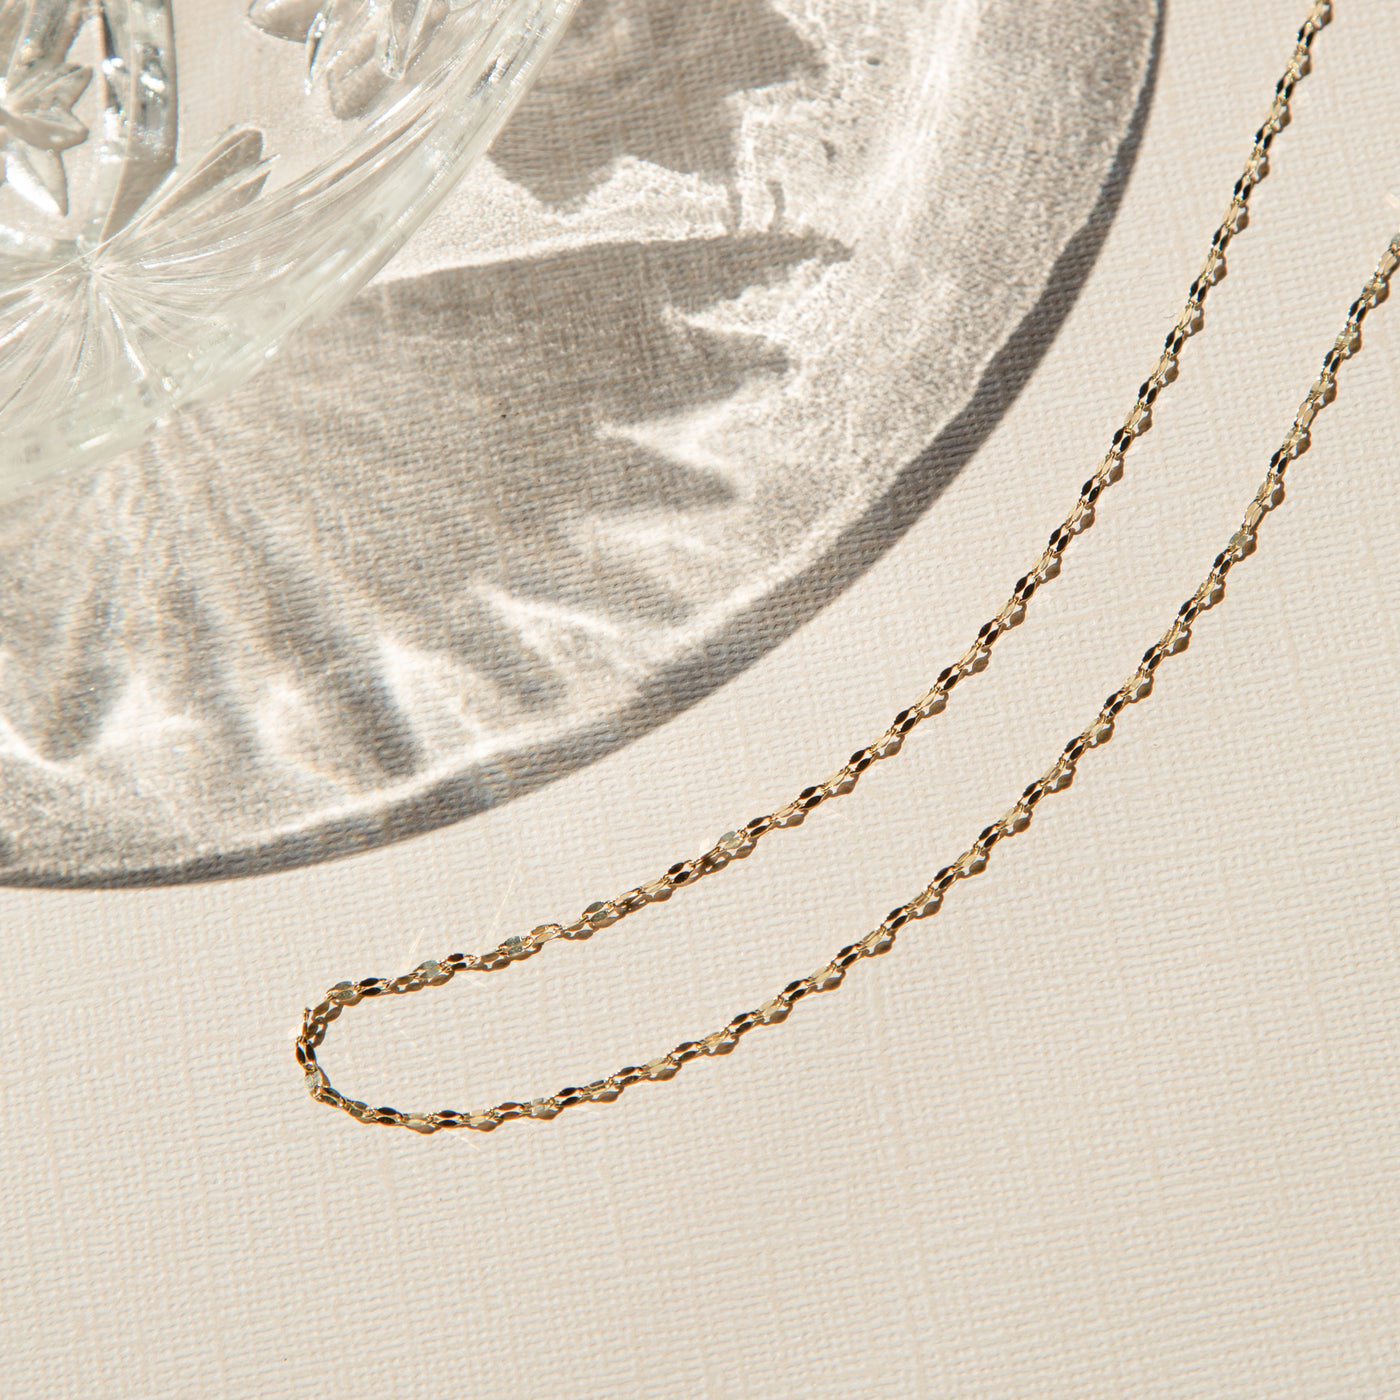 Twisted Lace Chain Necklace - 14k Solid Gold | Simple & Dainty Jewelry